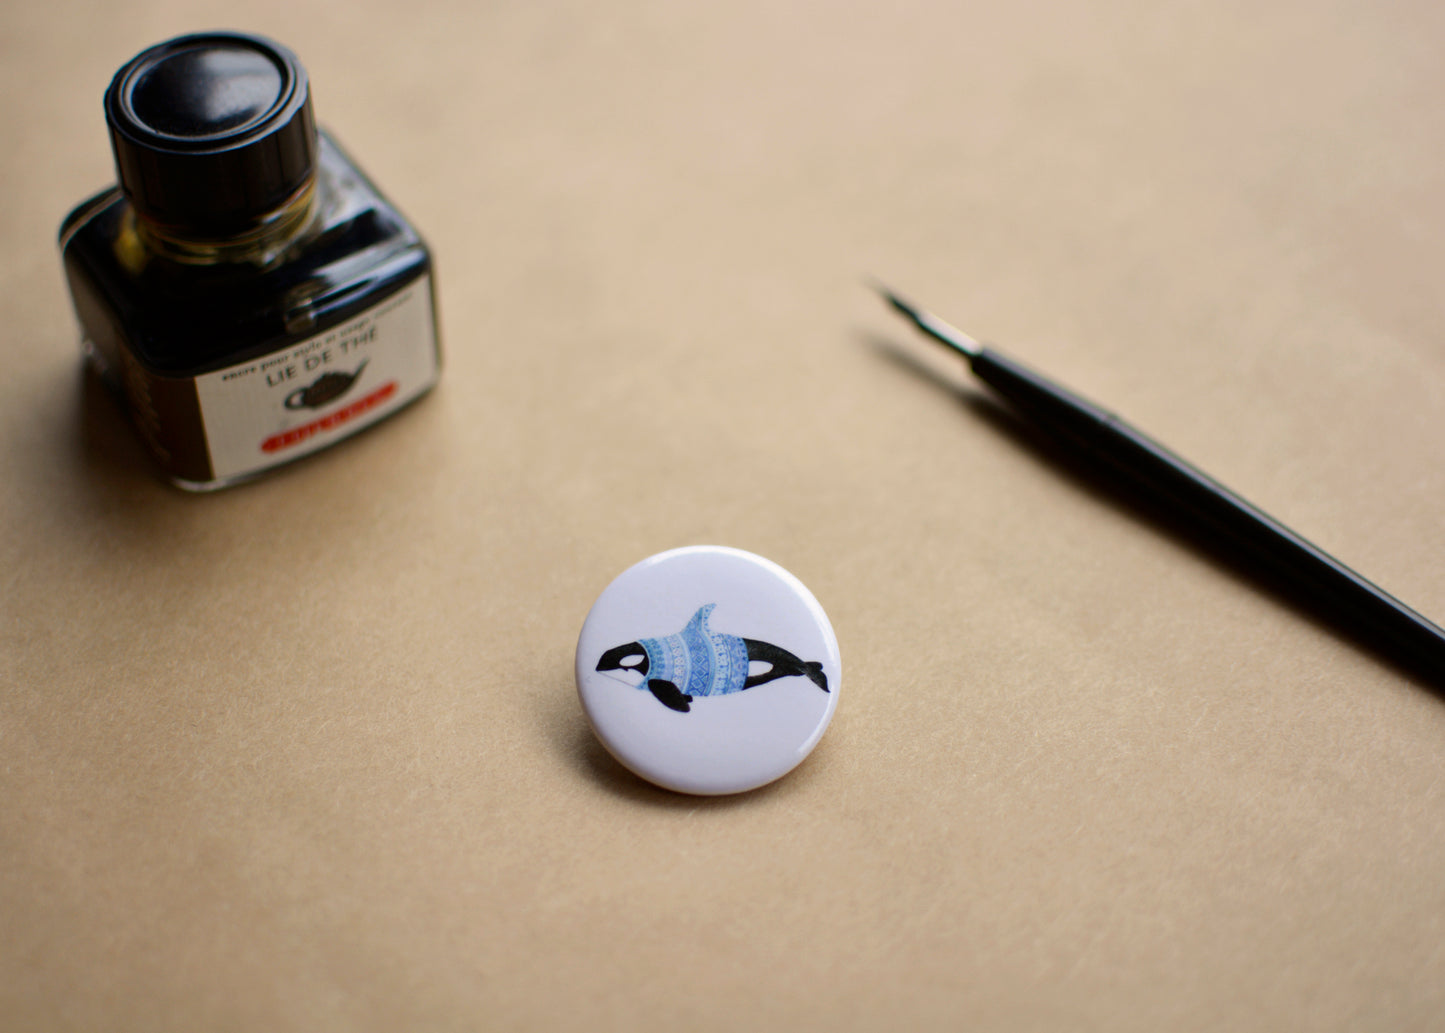 Ink drawing of a humpback whale wearing a blue sweater on a pin-backed button. Ink bottle and dip pen shown with the button.